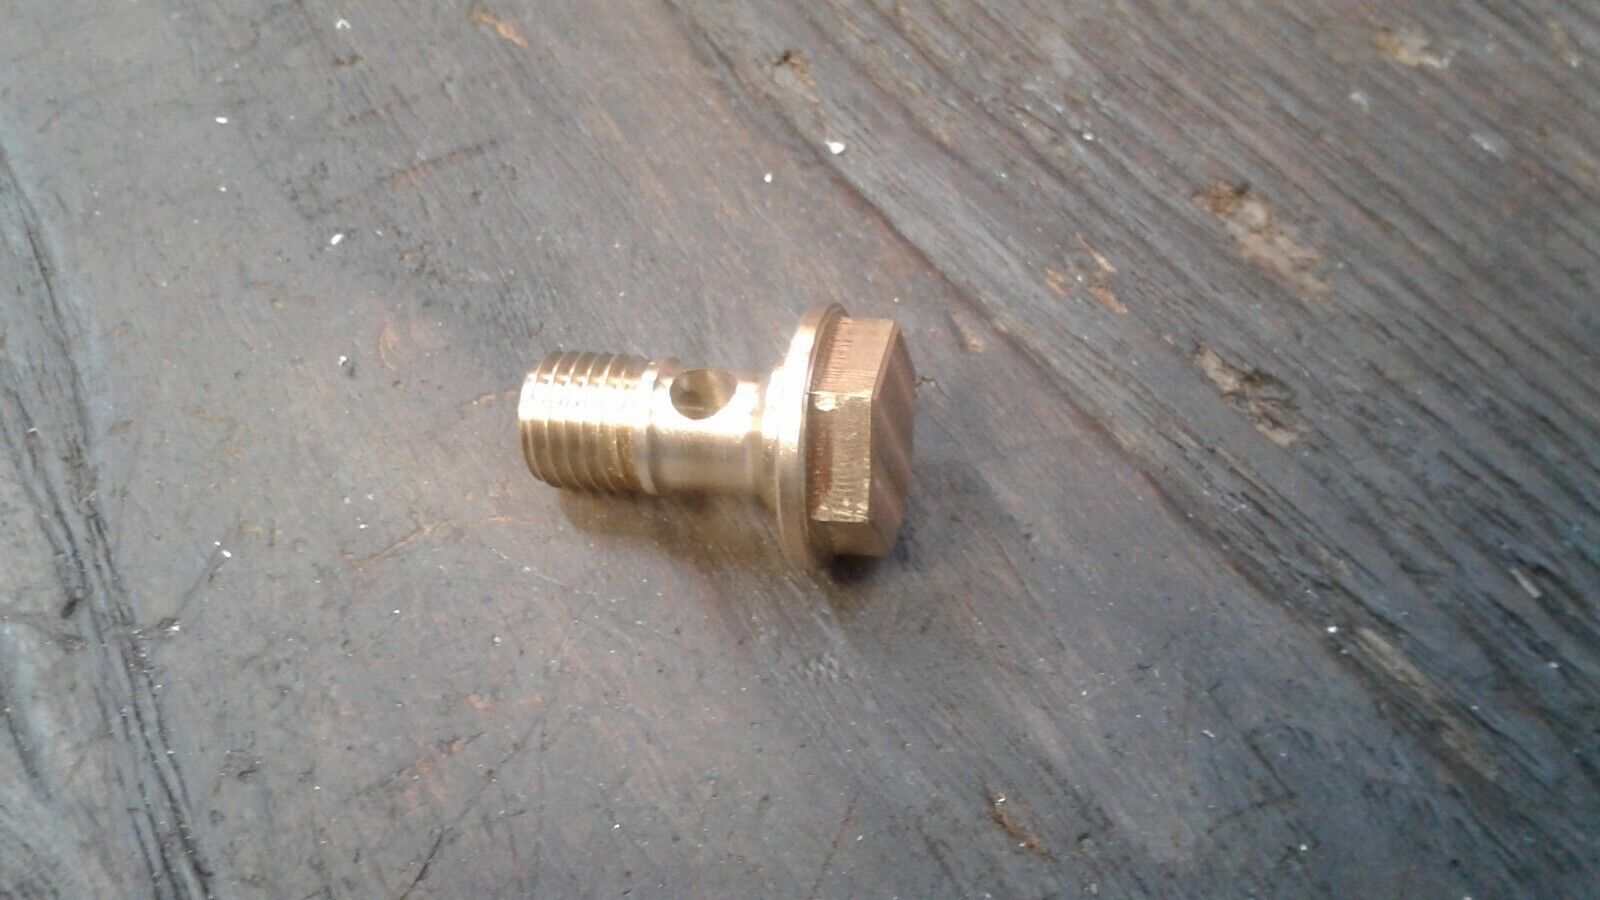 M12 x 1.5 BRASS FUEL INLET BANJO BOLT - Fits Weber and Dellorto